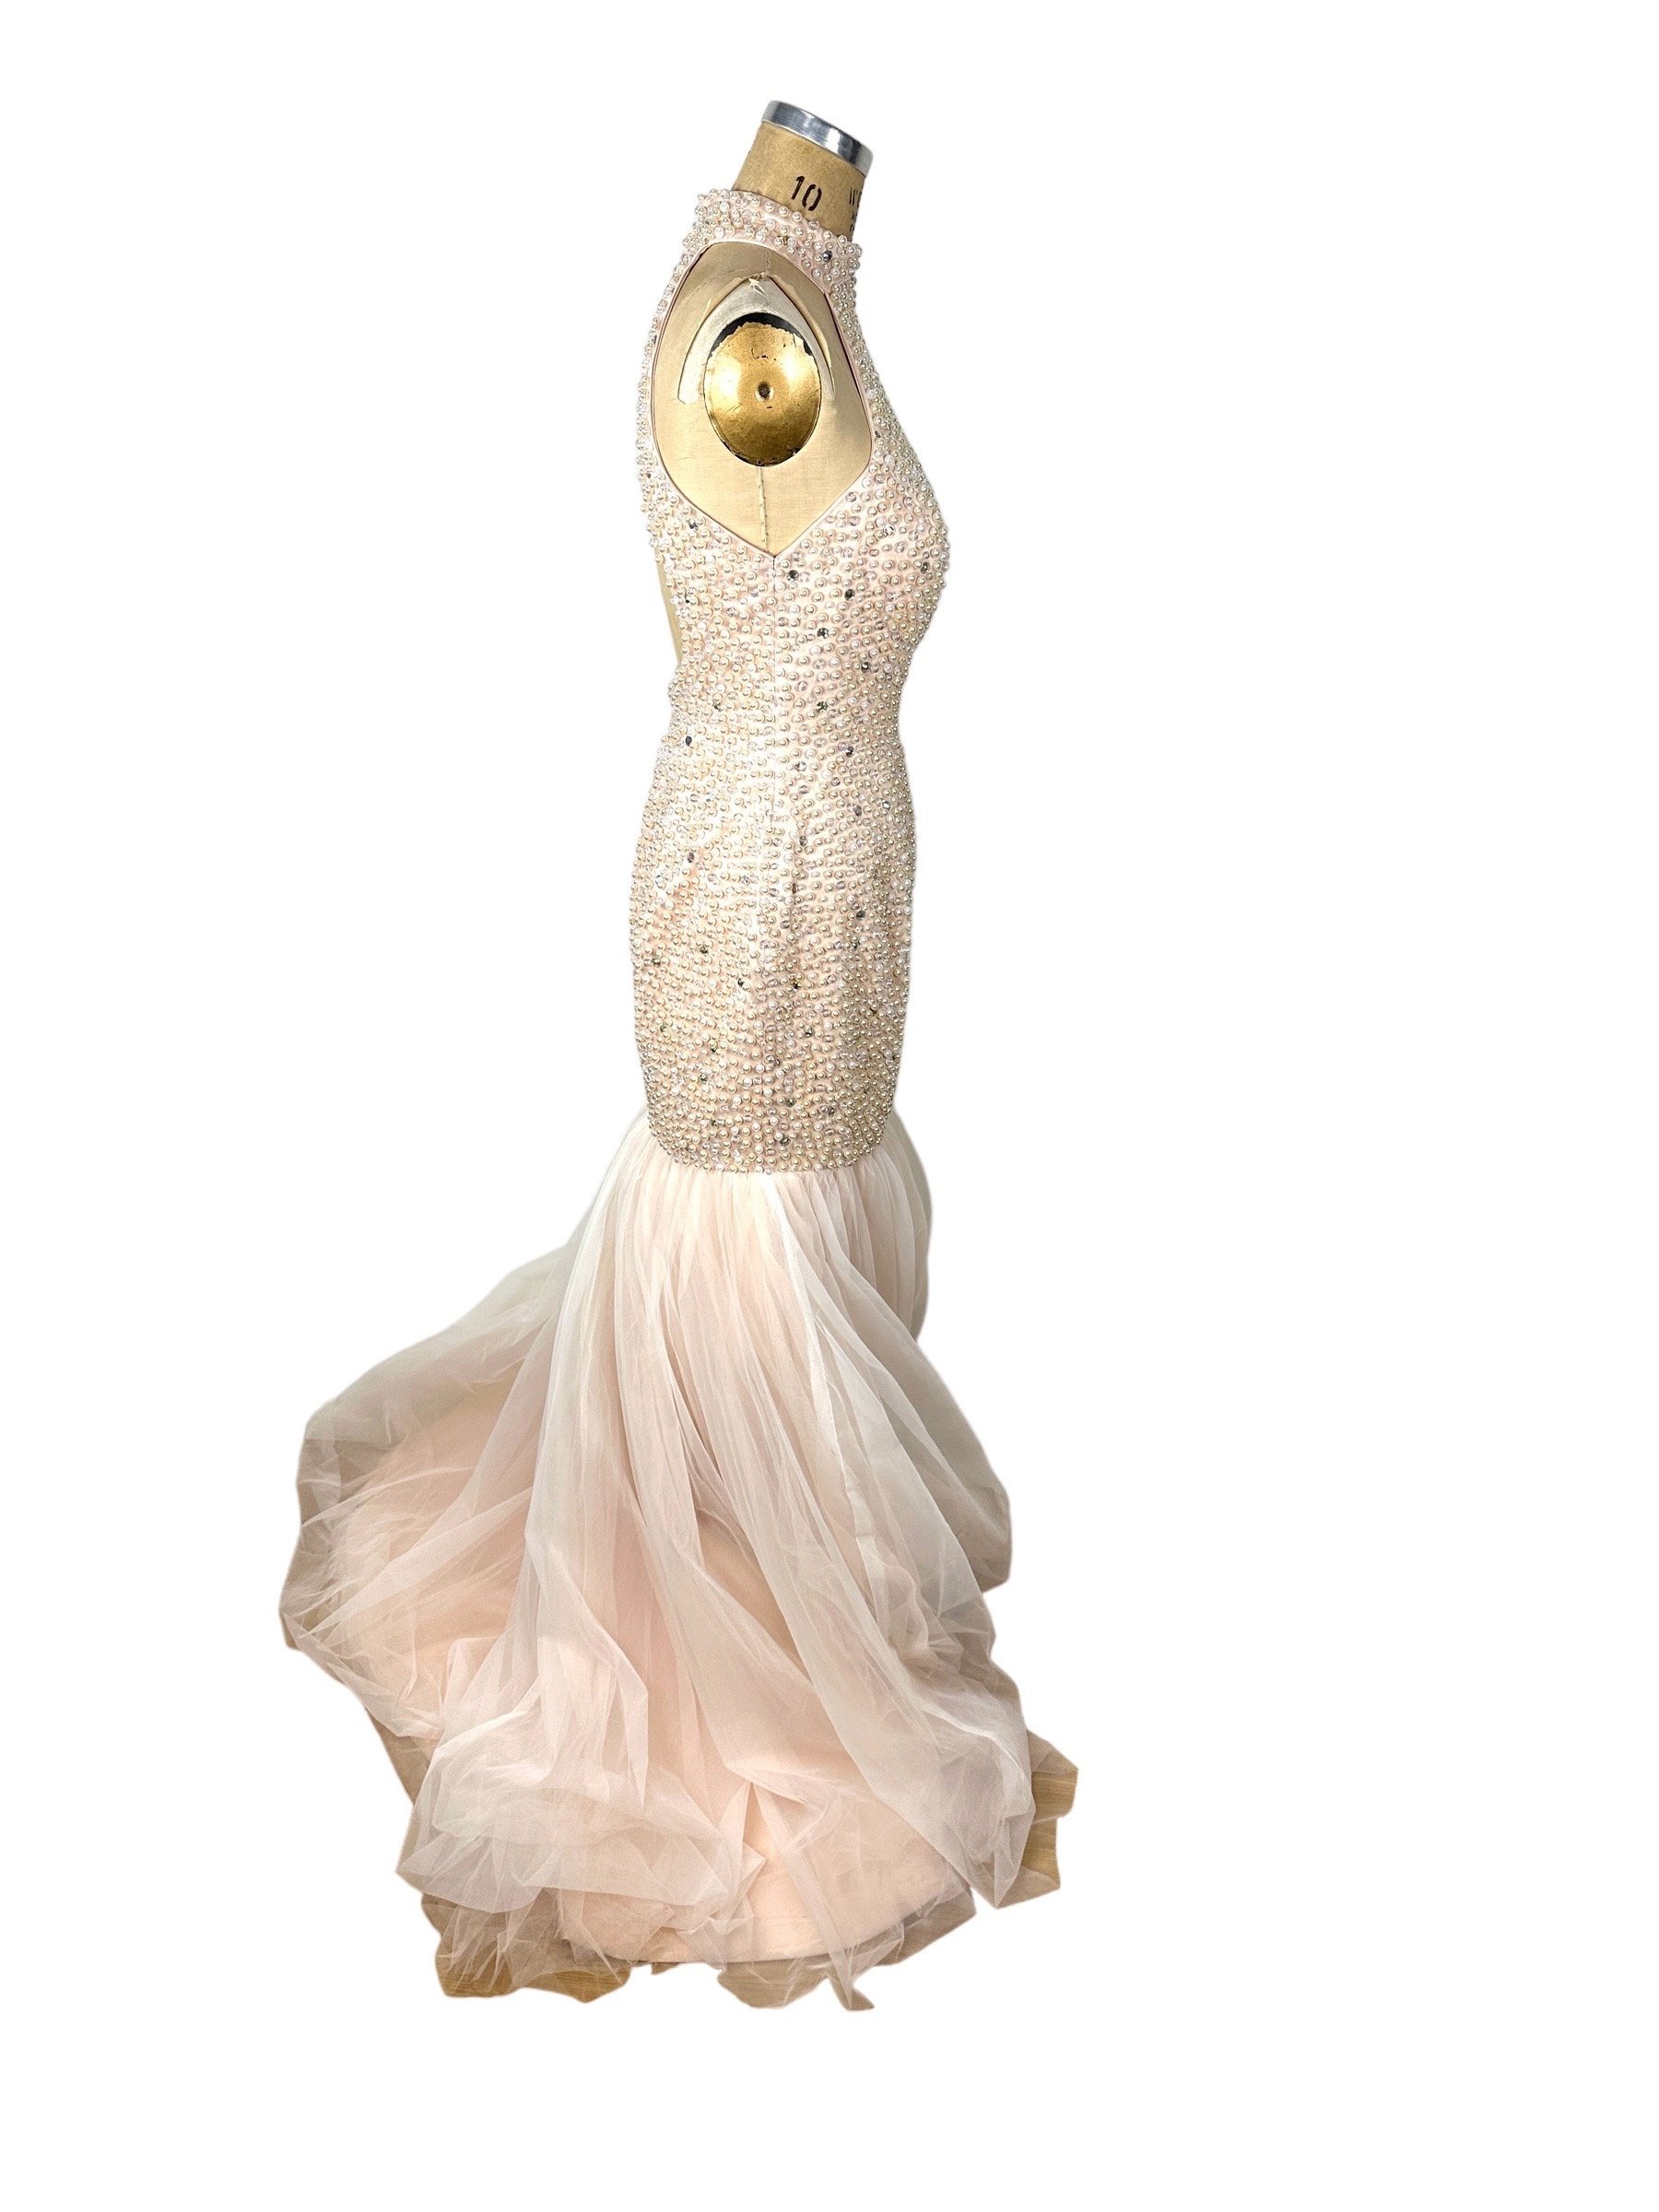 1980s Halter Gown Blush Pink With Pearls and Rhinestones Mermaid